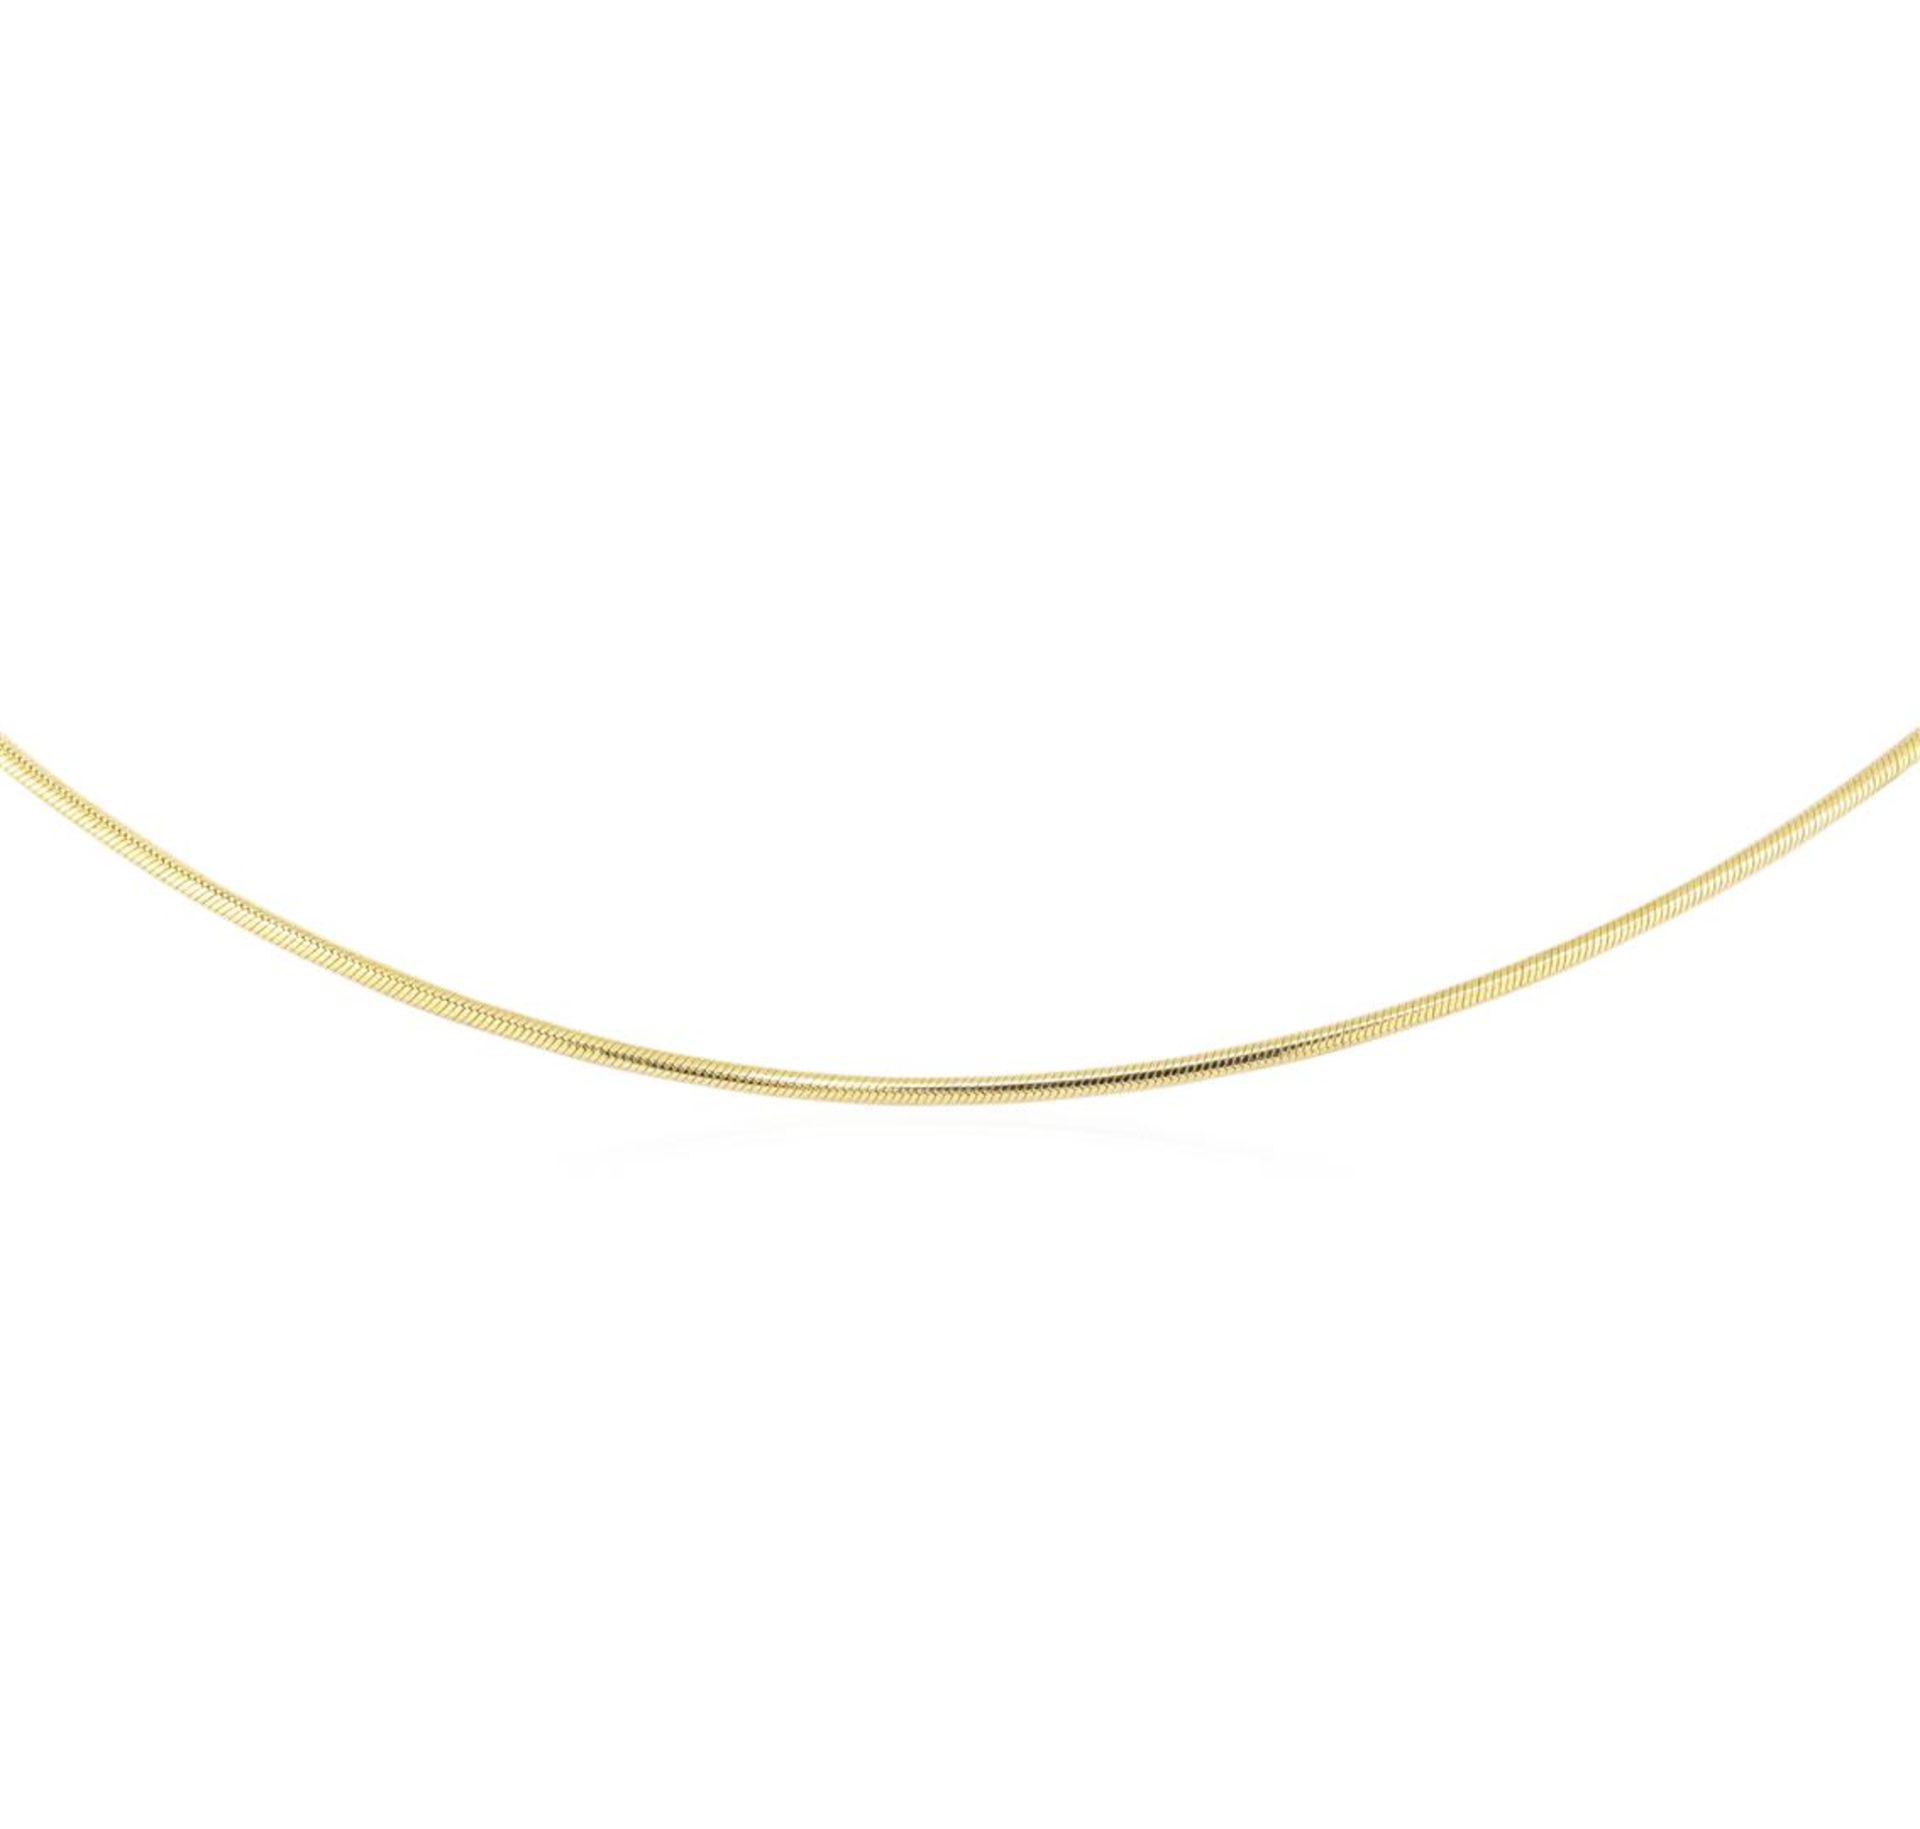 18 Inch Rounded Snake Chain - 14KT Yellow Gold - Image 2 of 2